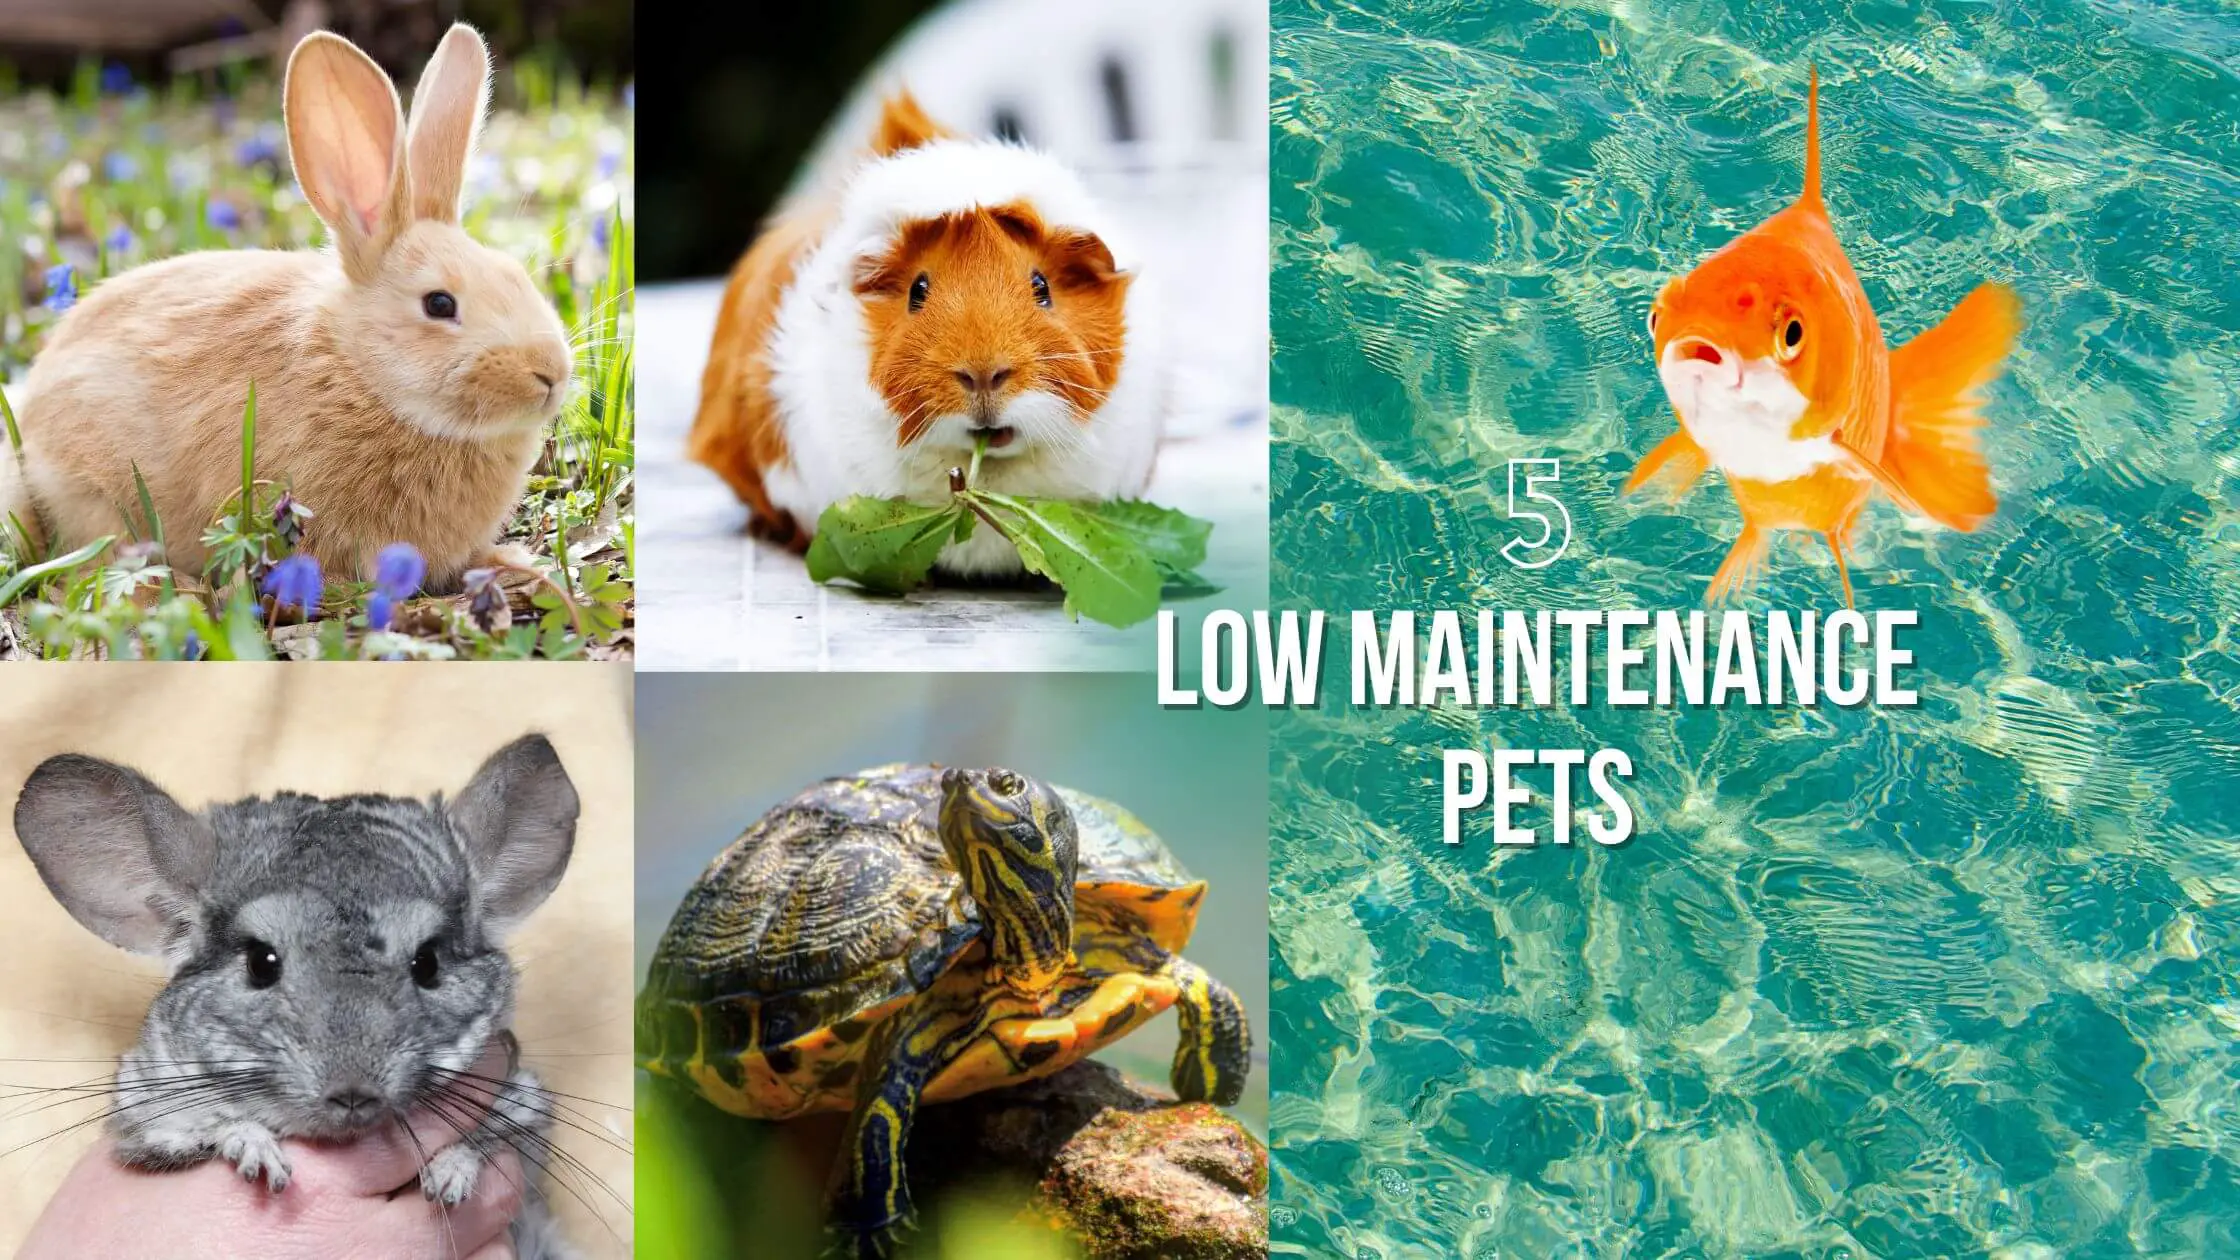 Low maintenance pets: 5 Pets that don't need much attention - Proto Animal